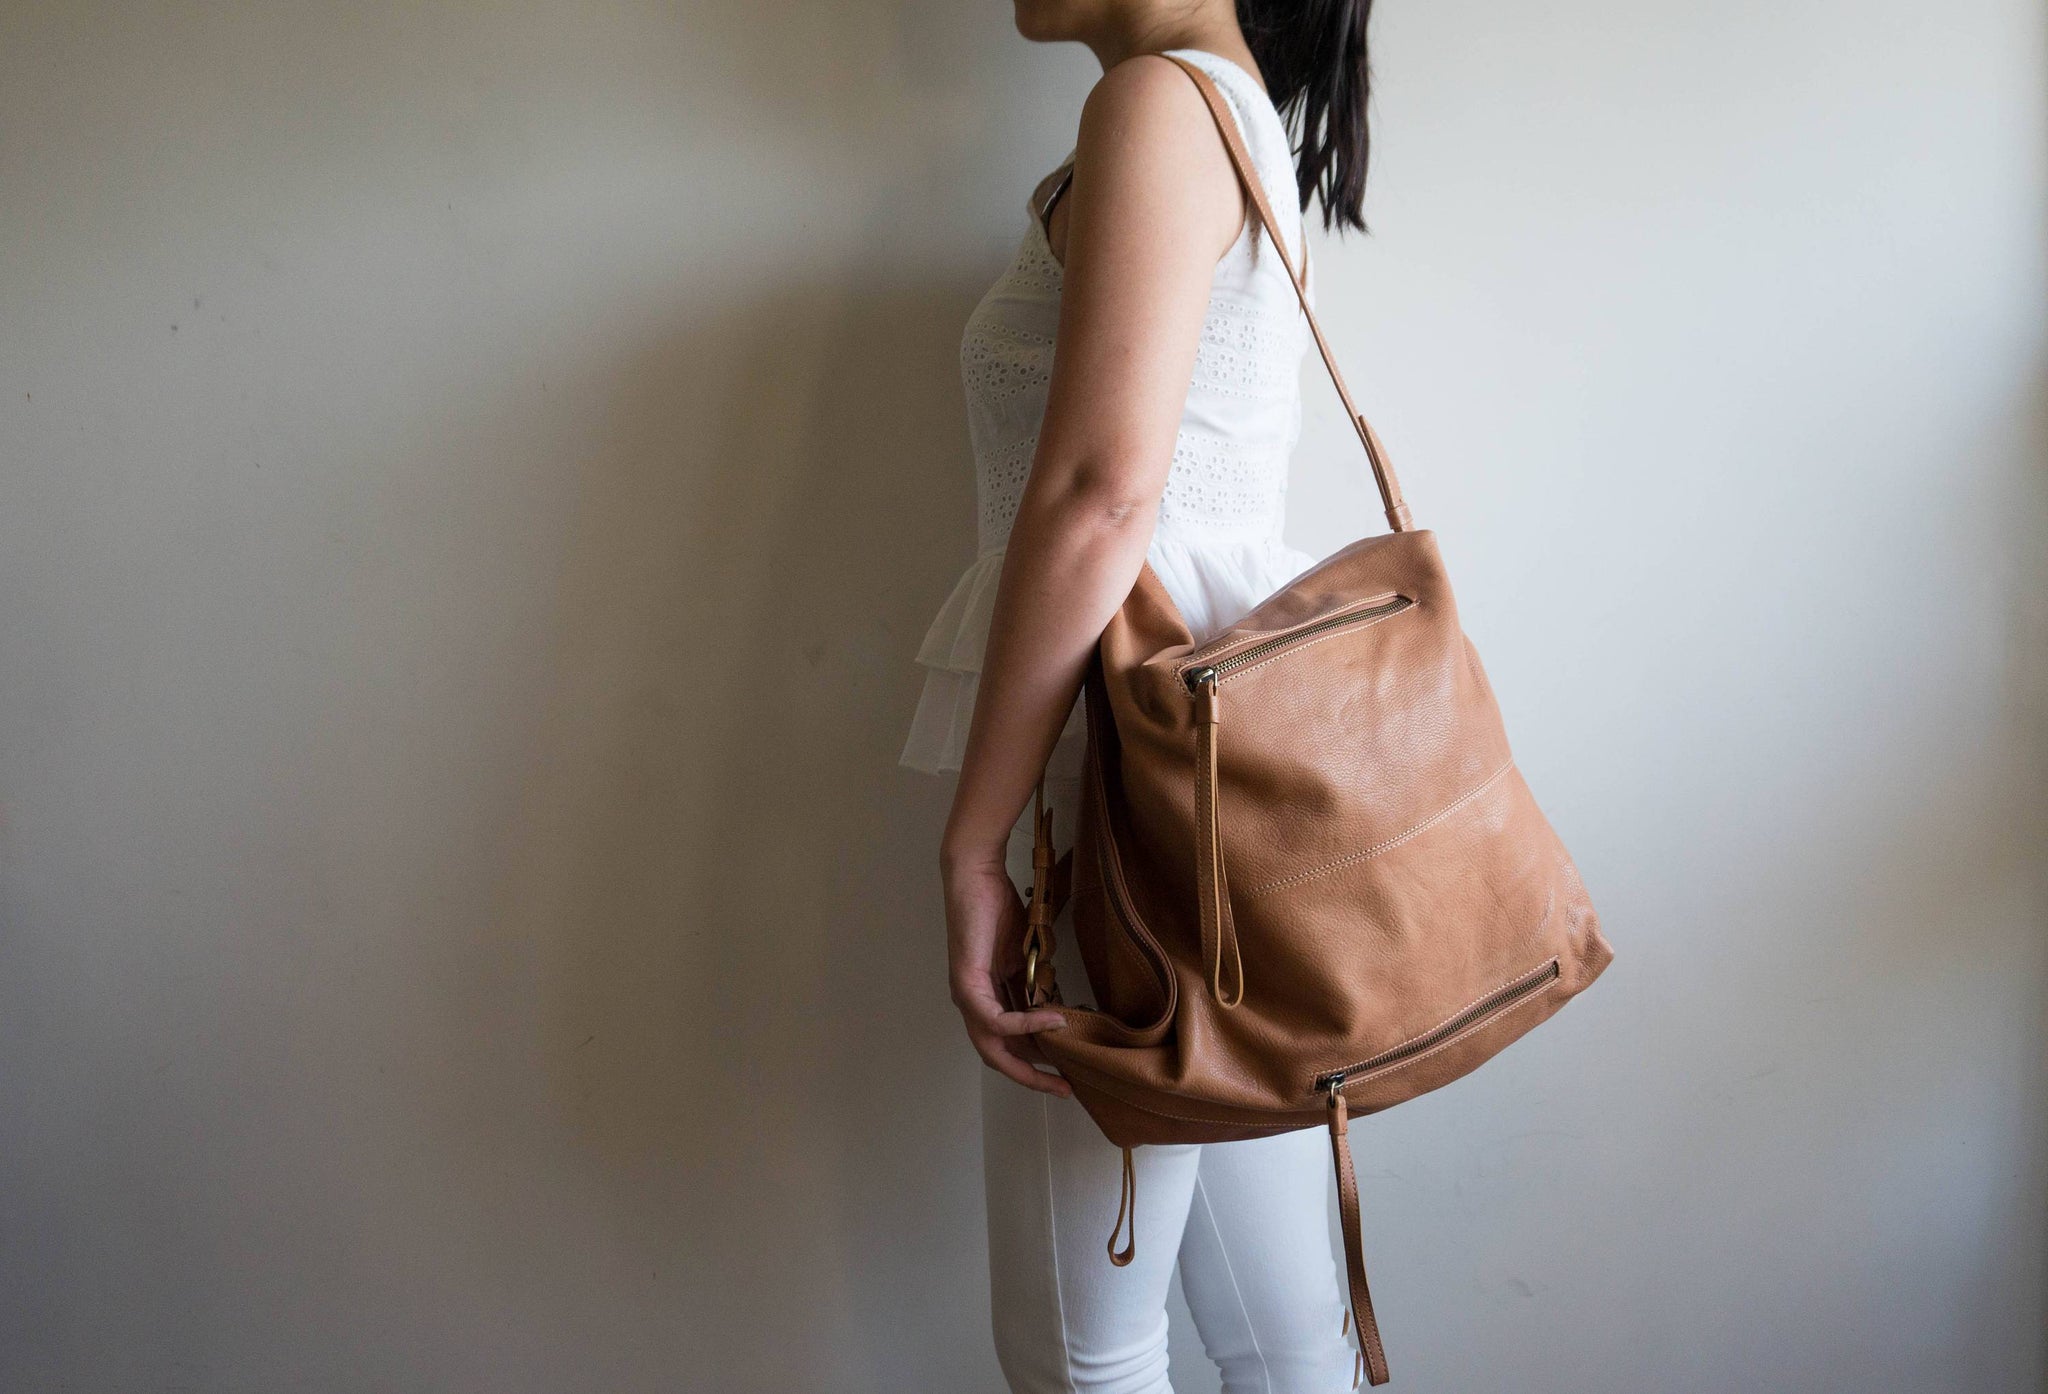 Soft Leather Convertible Backpack Purse